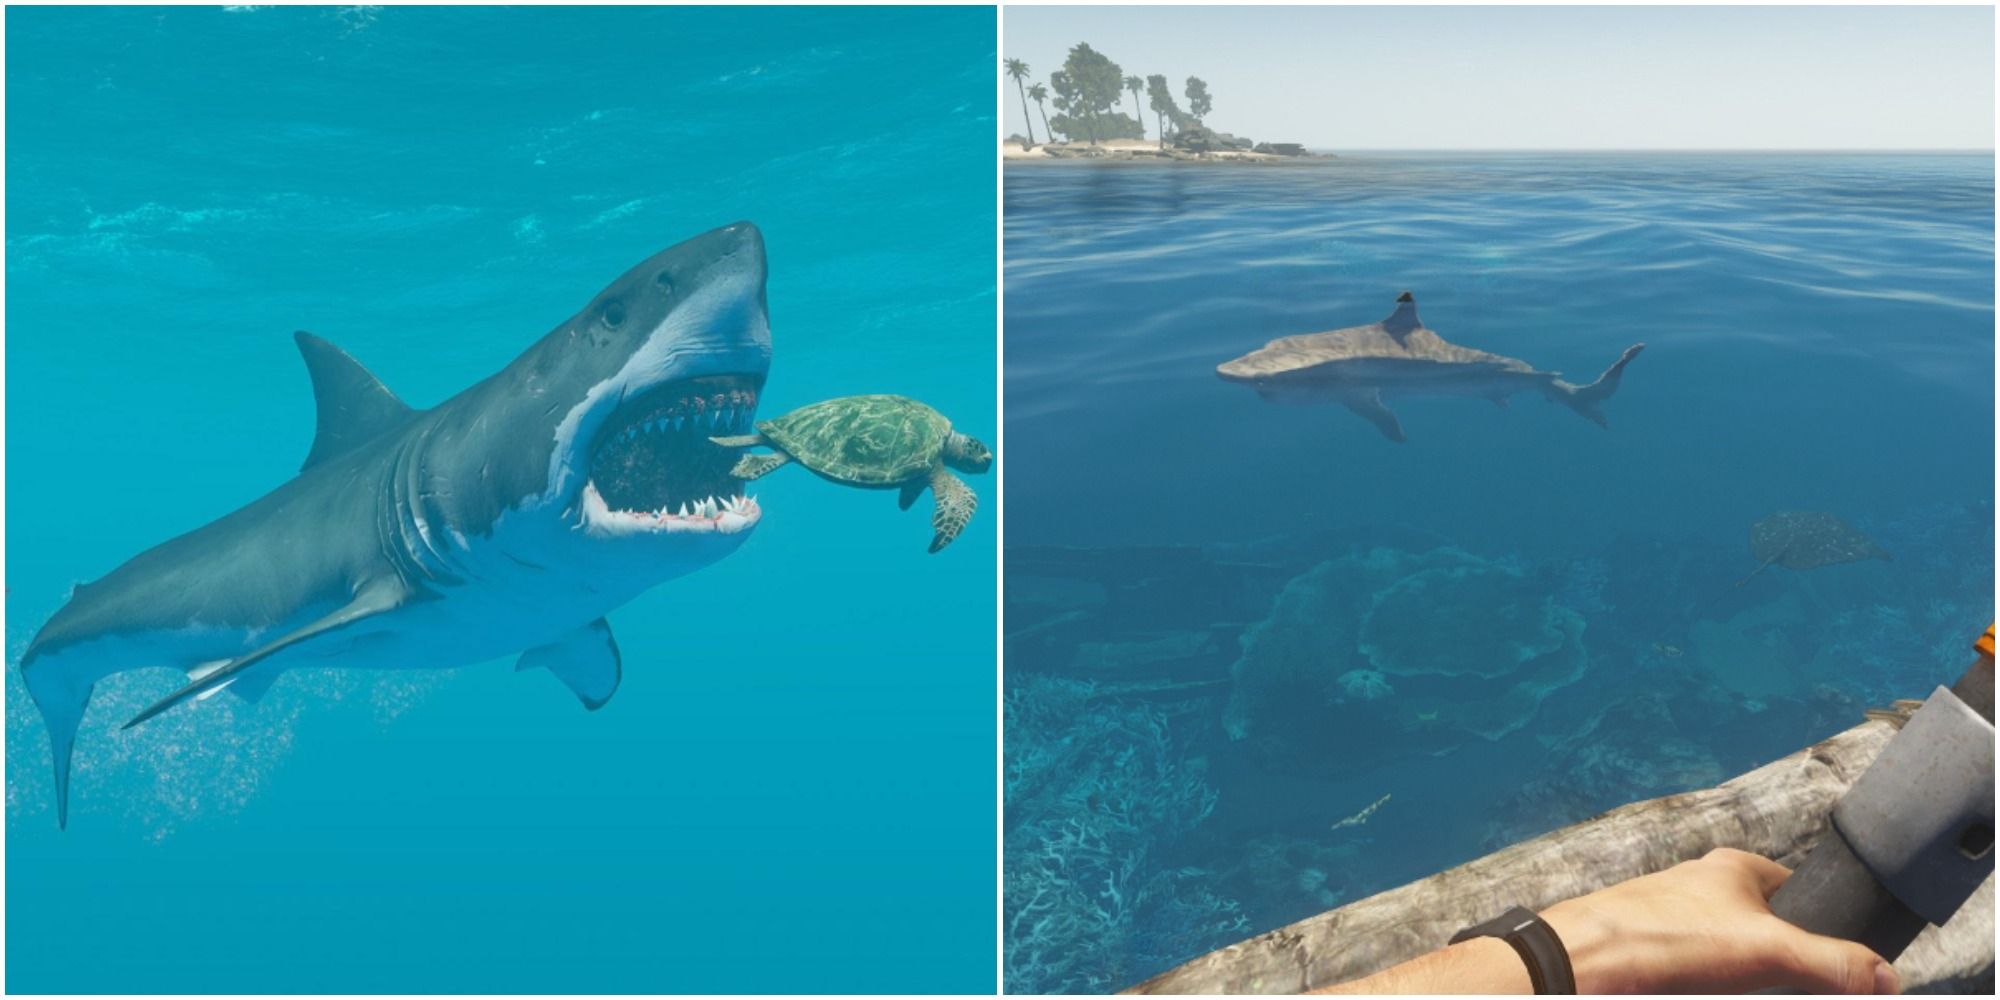 where to find whale sharks in stranded deep｜TikTok Search